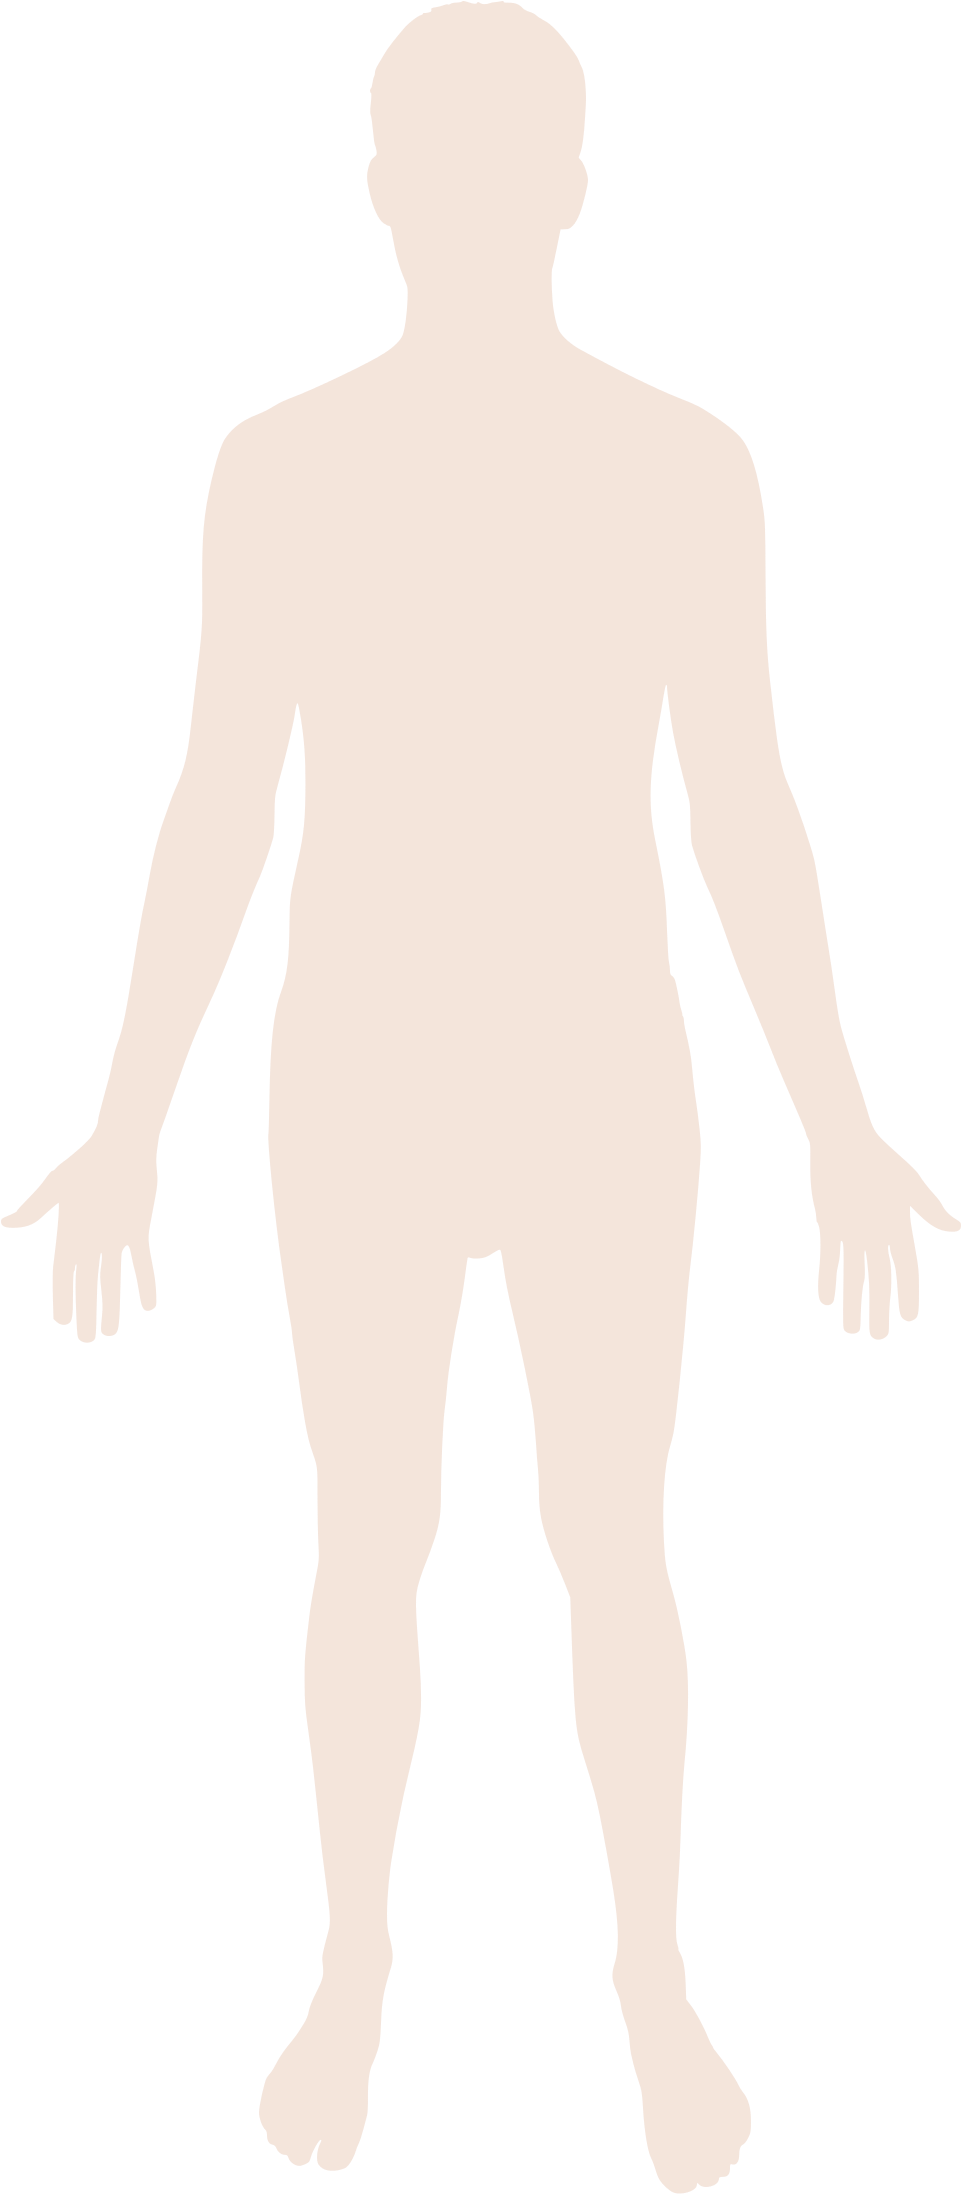 Body Outline Clipart Transparent Background and other clipart images on